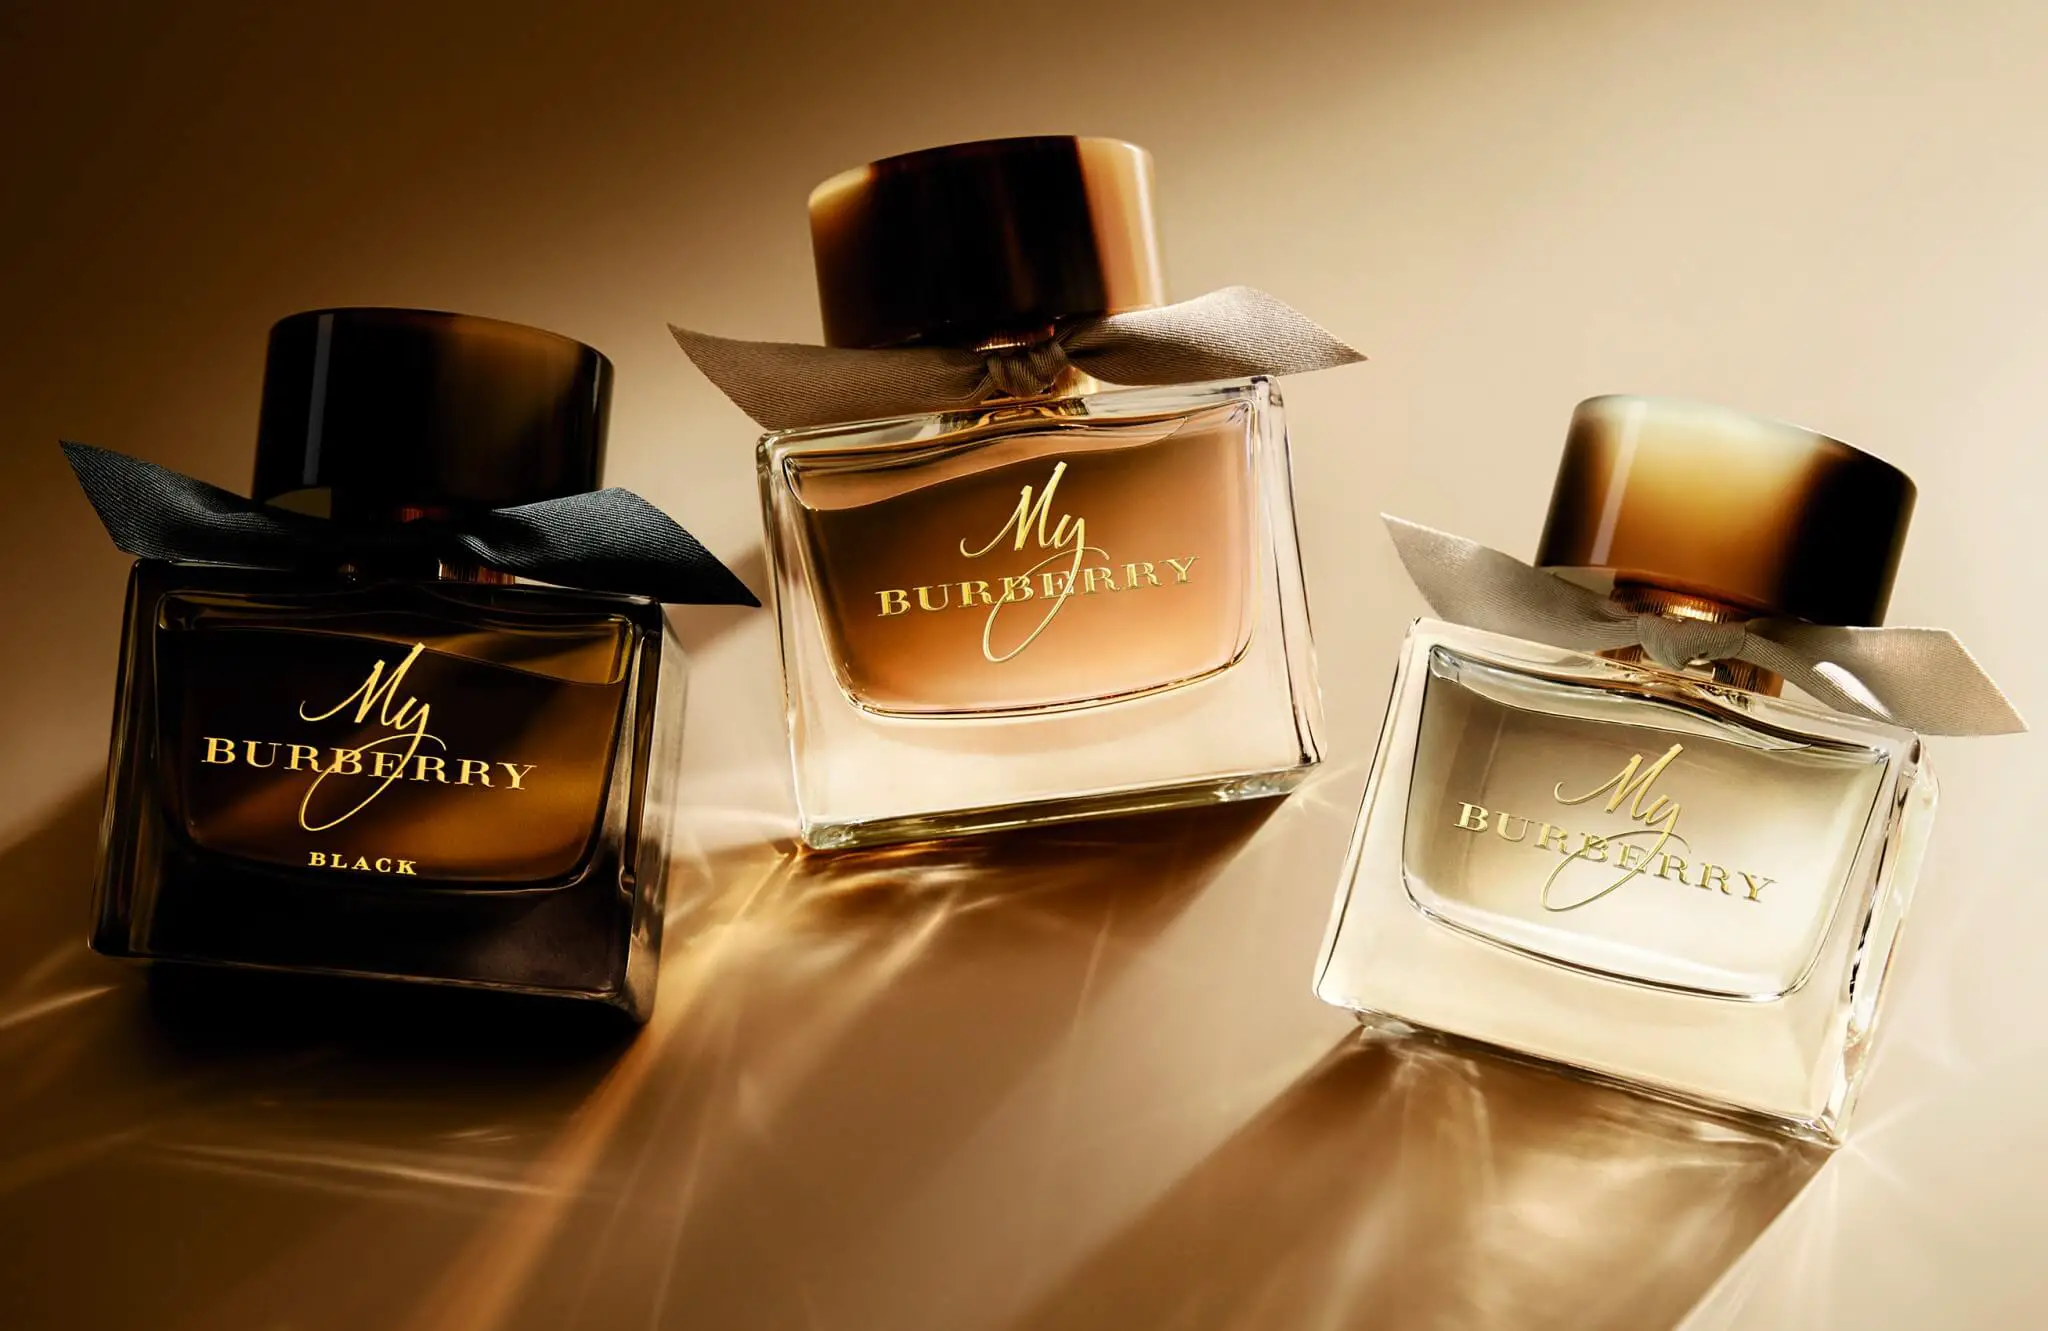 A Guide To The My Burberry Perfume Range